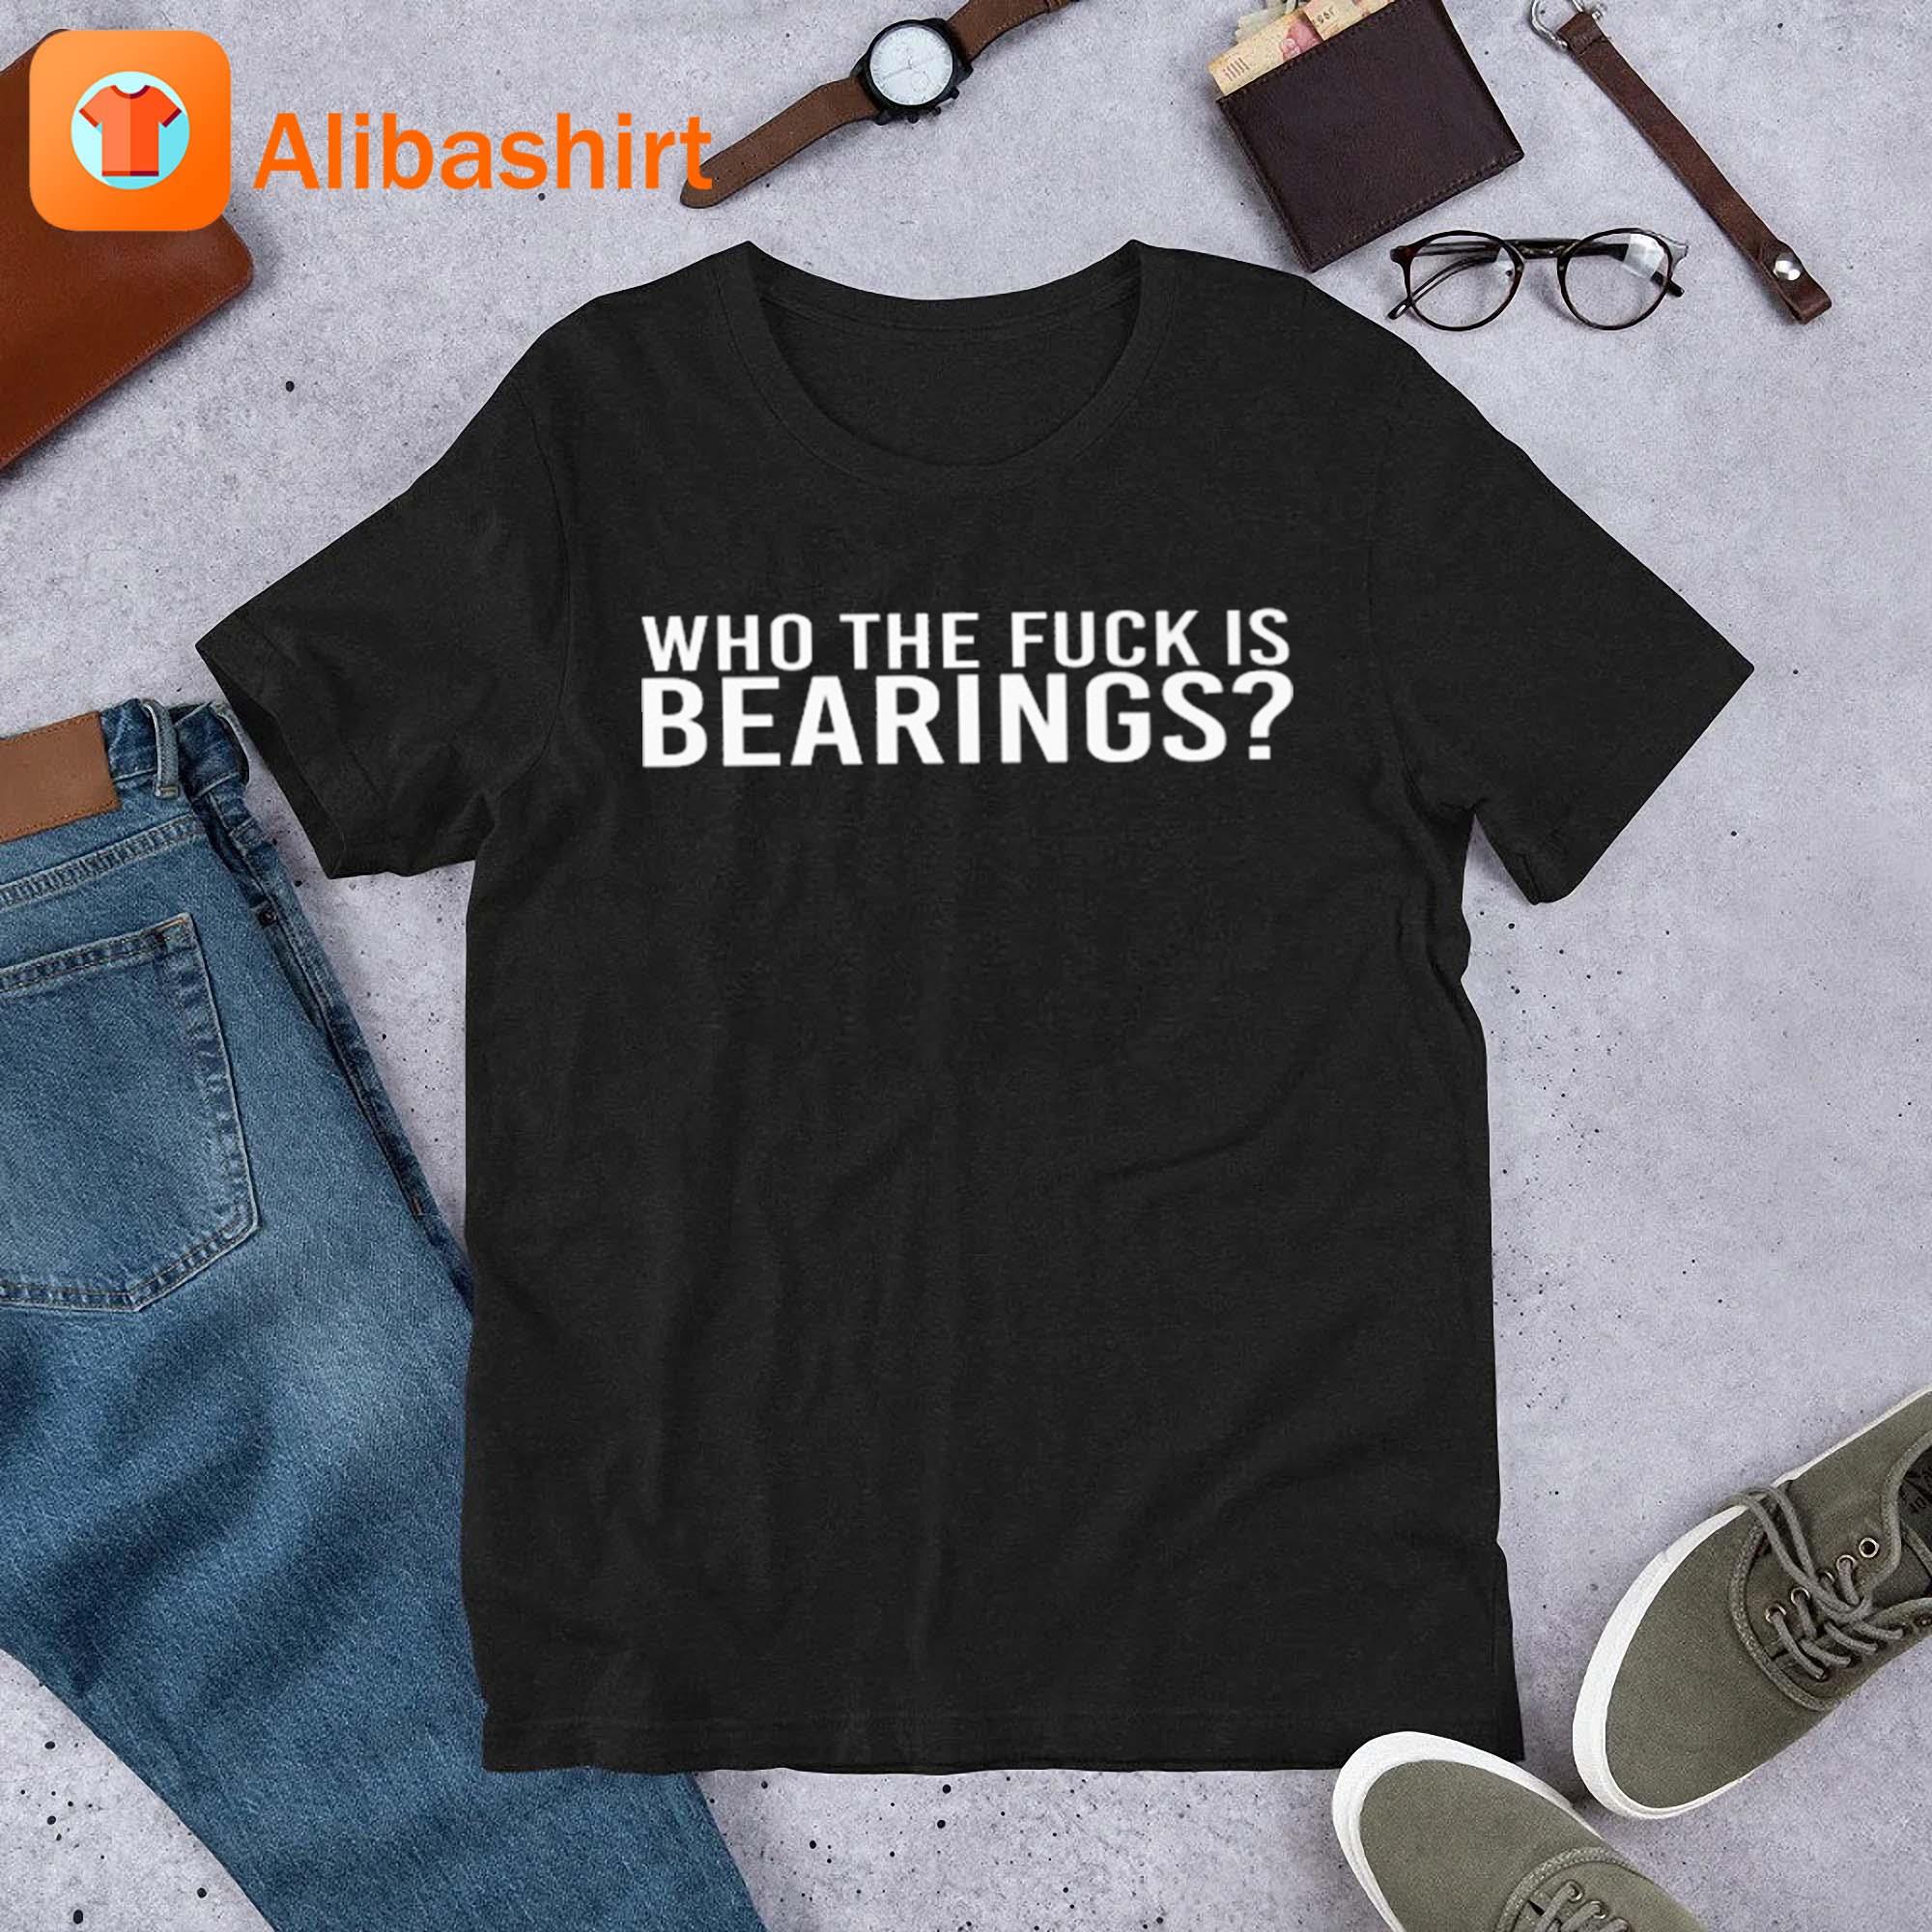 Who The Fuck Is Bearings Shirt